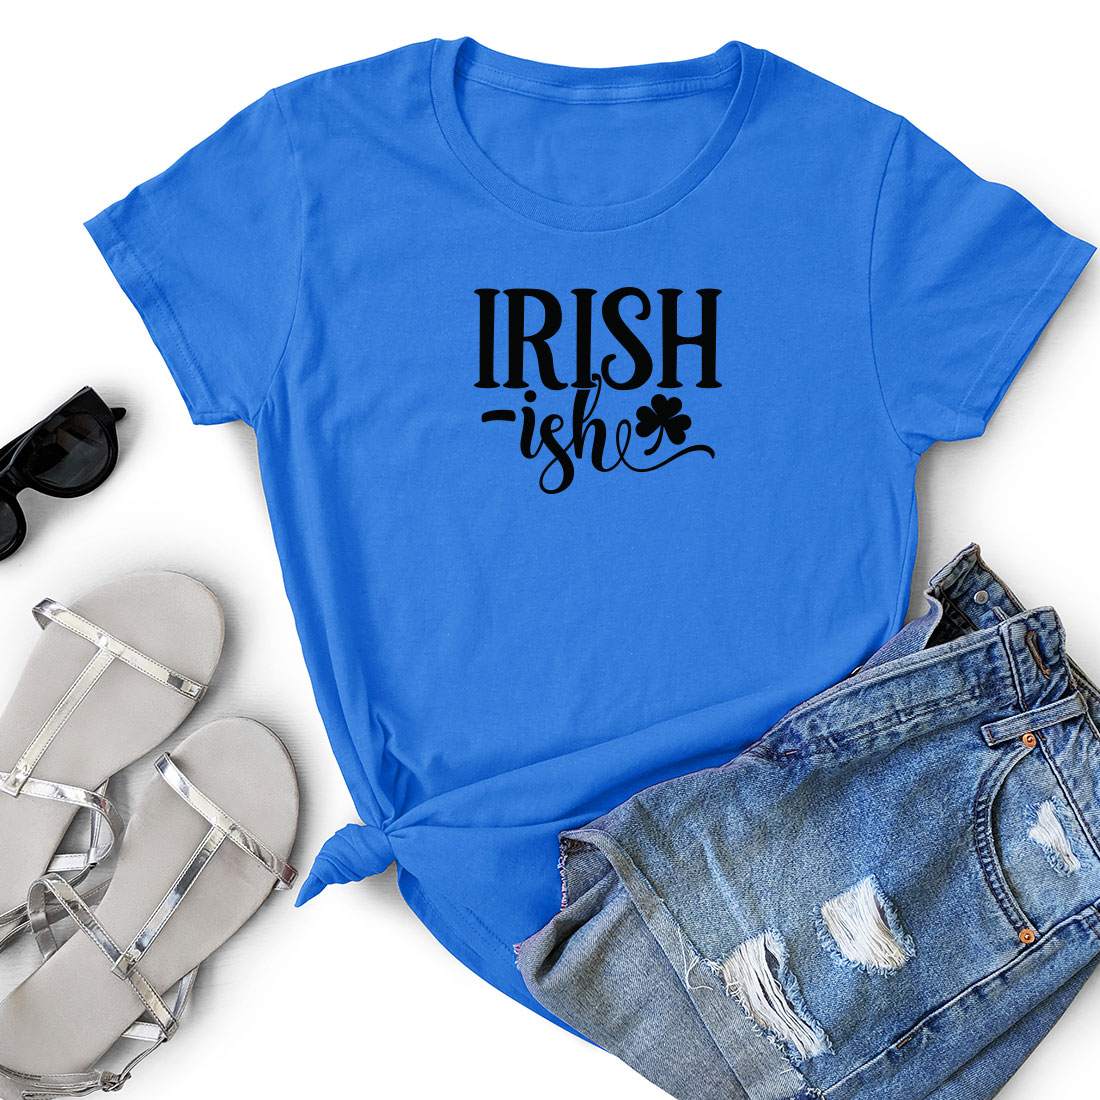 T - shirt that says irish is here next to a pair of shorts and.